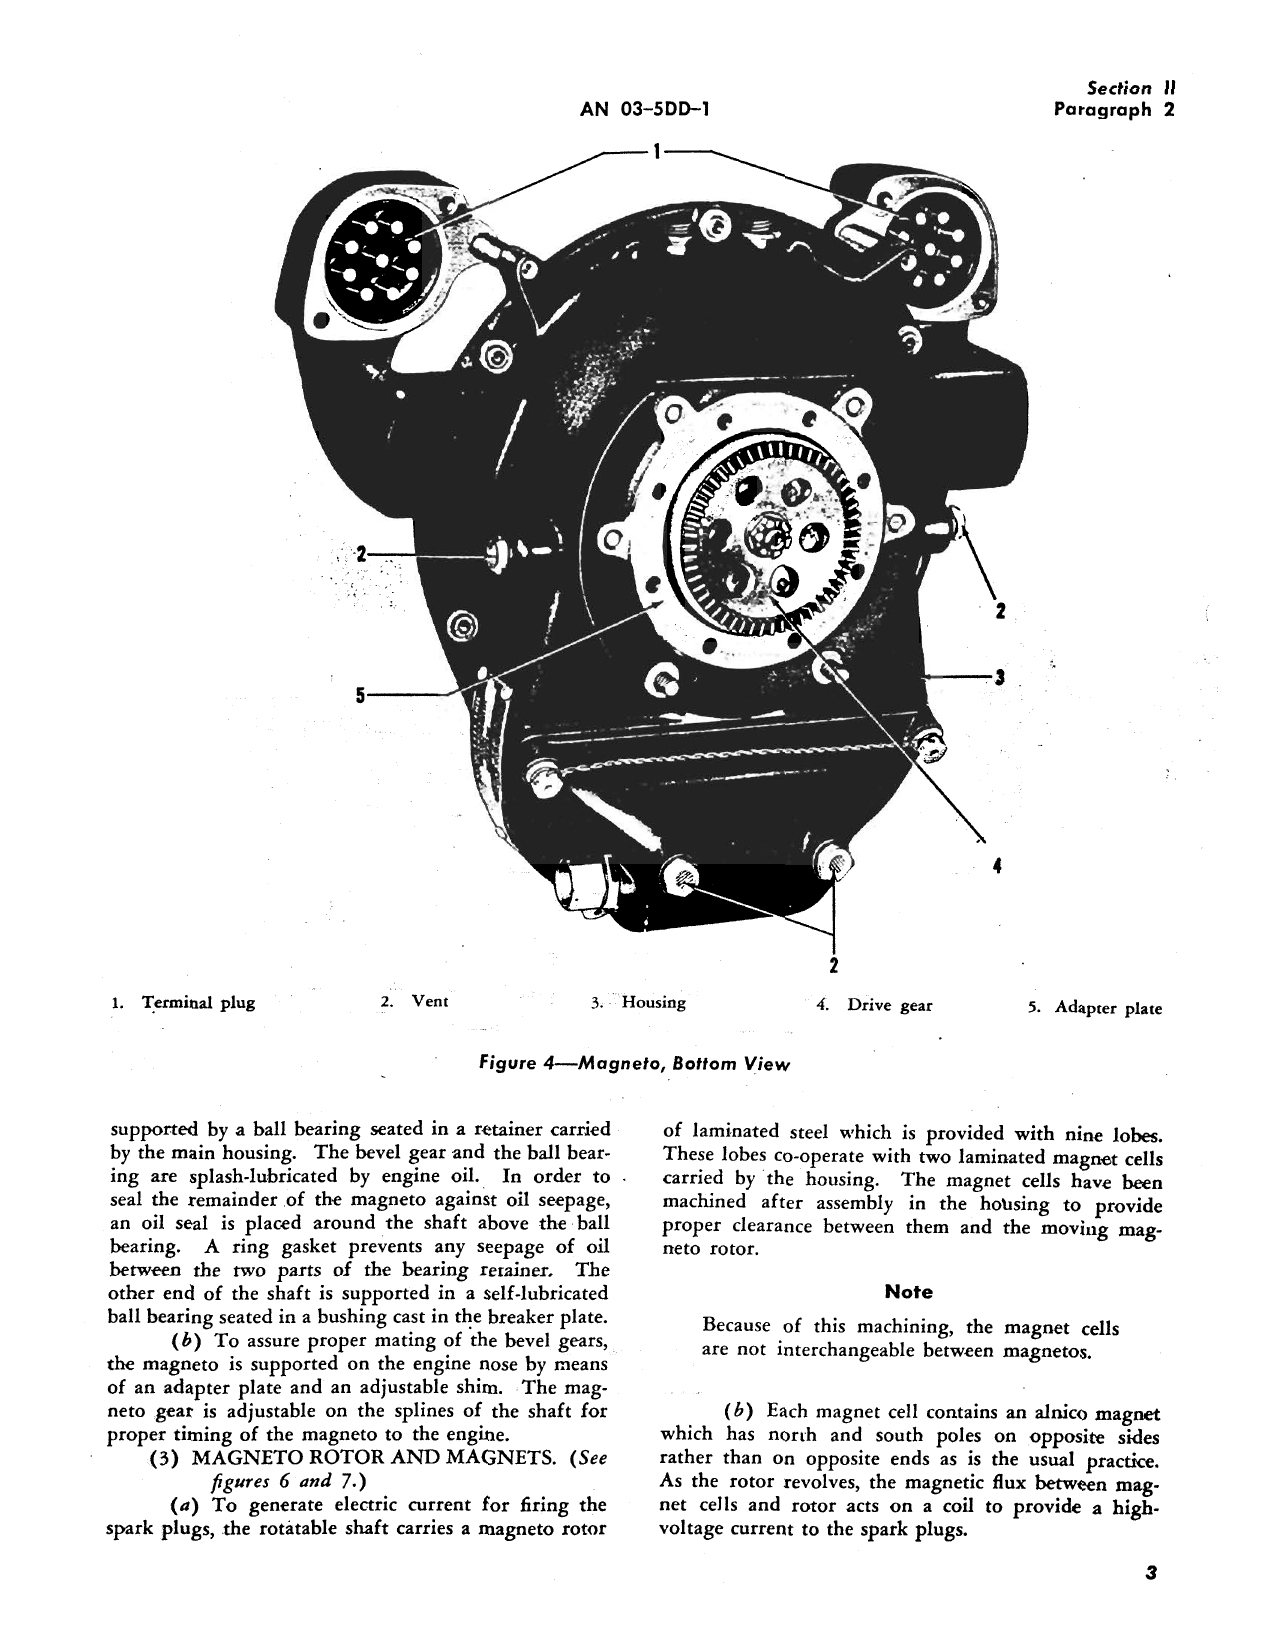 Sample page 7 from AirCorps Library document: Operation, Service, & Overhaul Manual with Parts Catalog for R-2800 B Series